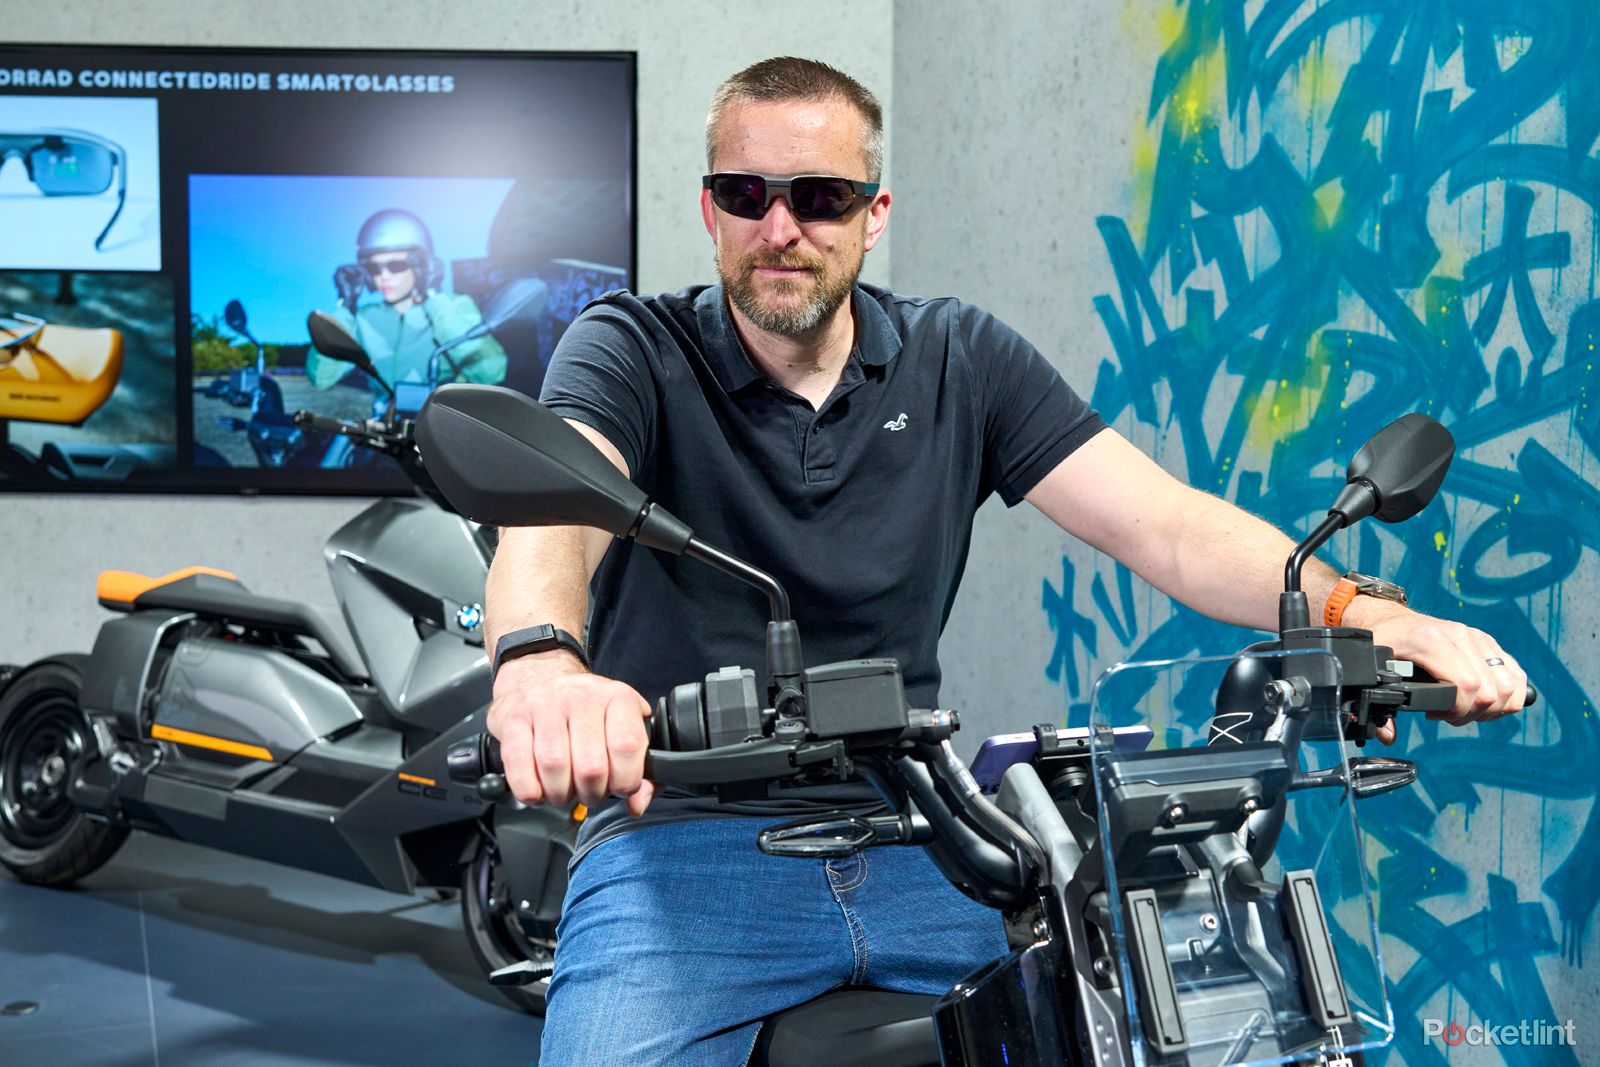 Pairing the BMW Smartglasses with new electric CE 02 bike give me Terminator thrills